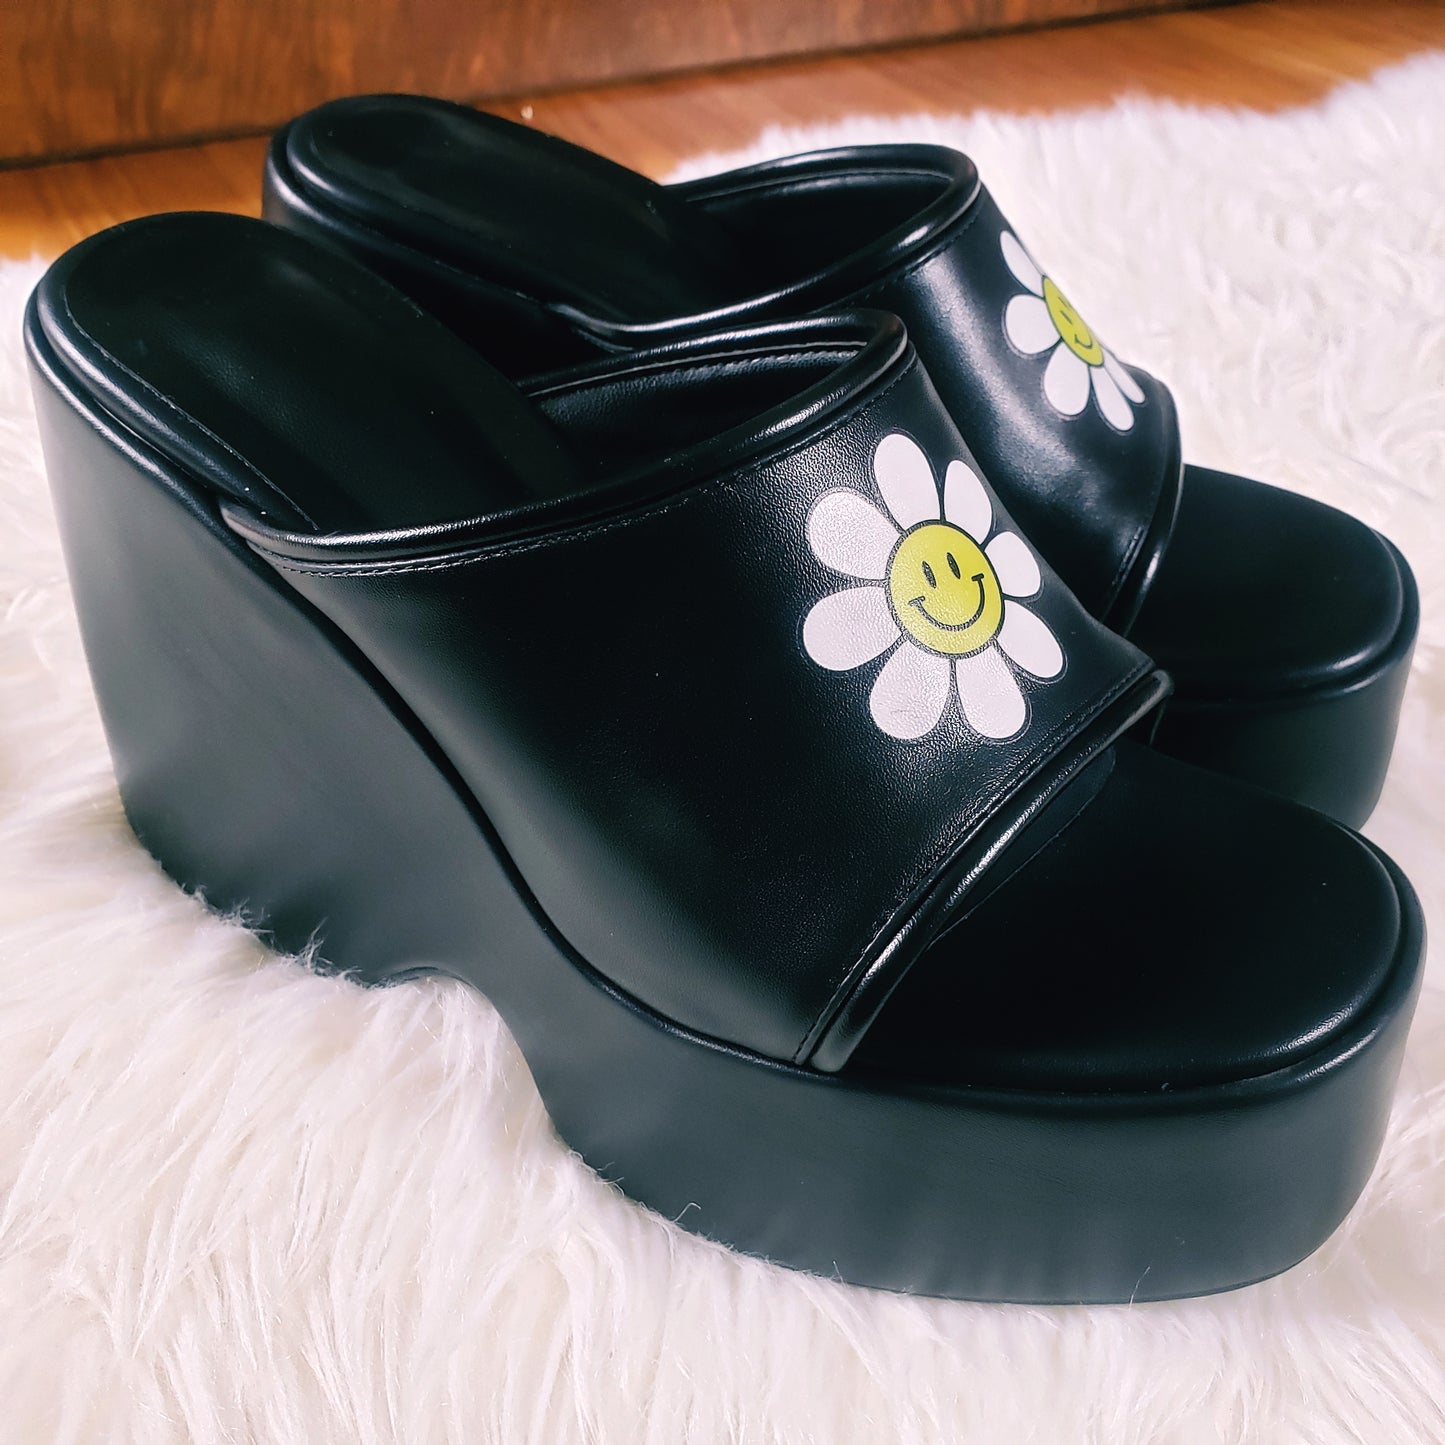 Black Platform Sandals with smiling daisy graphic on the front upper. Open toe flatform sandals. Chunky platform style, 90s and 70s inspired.